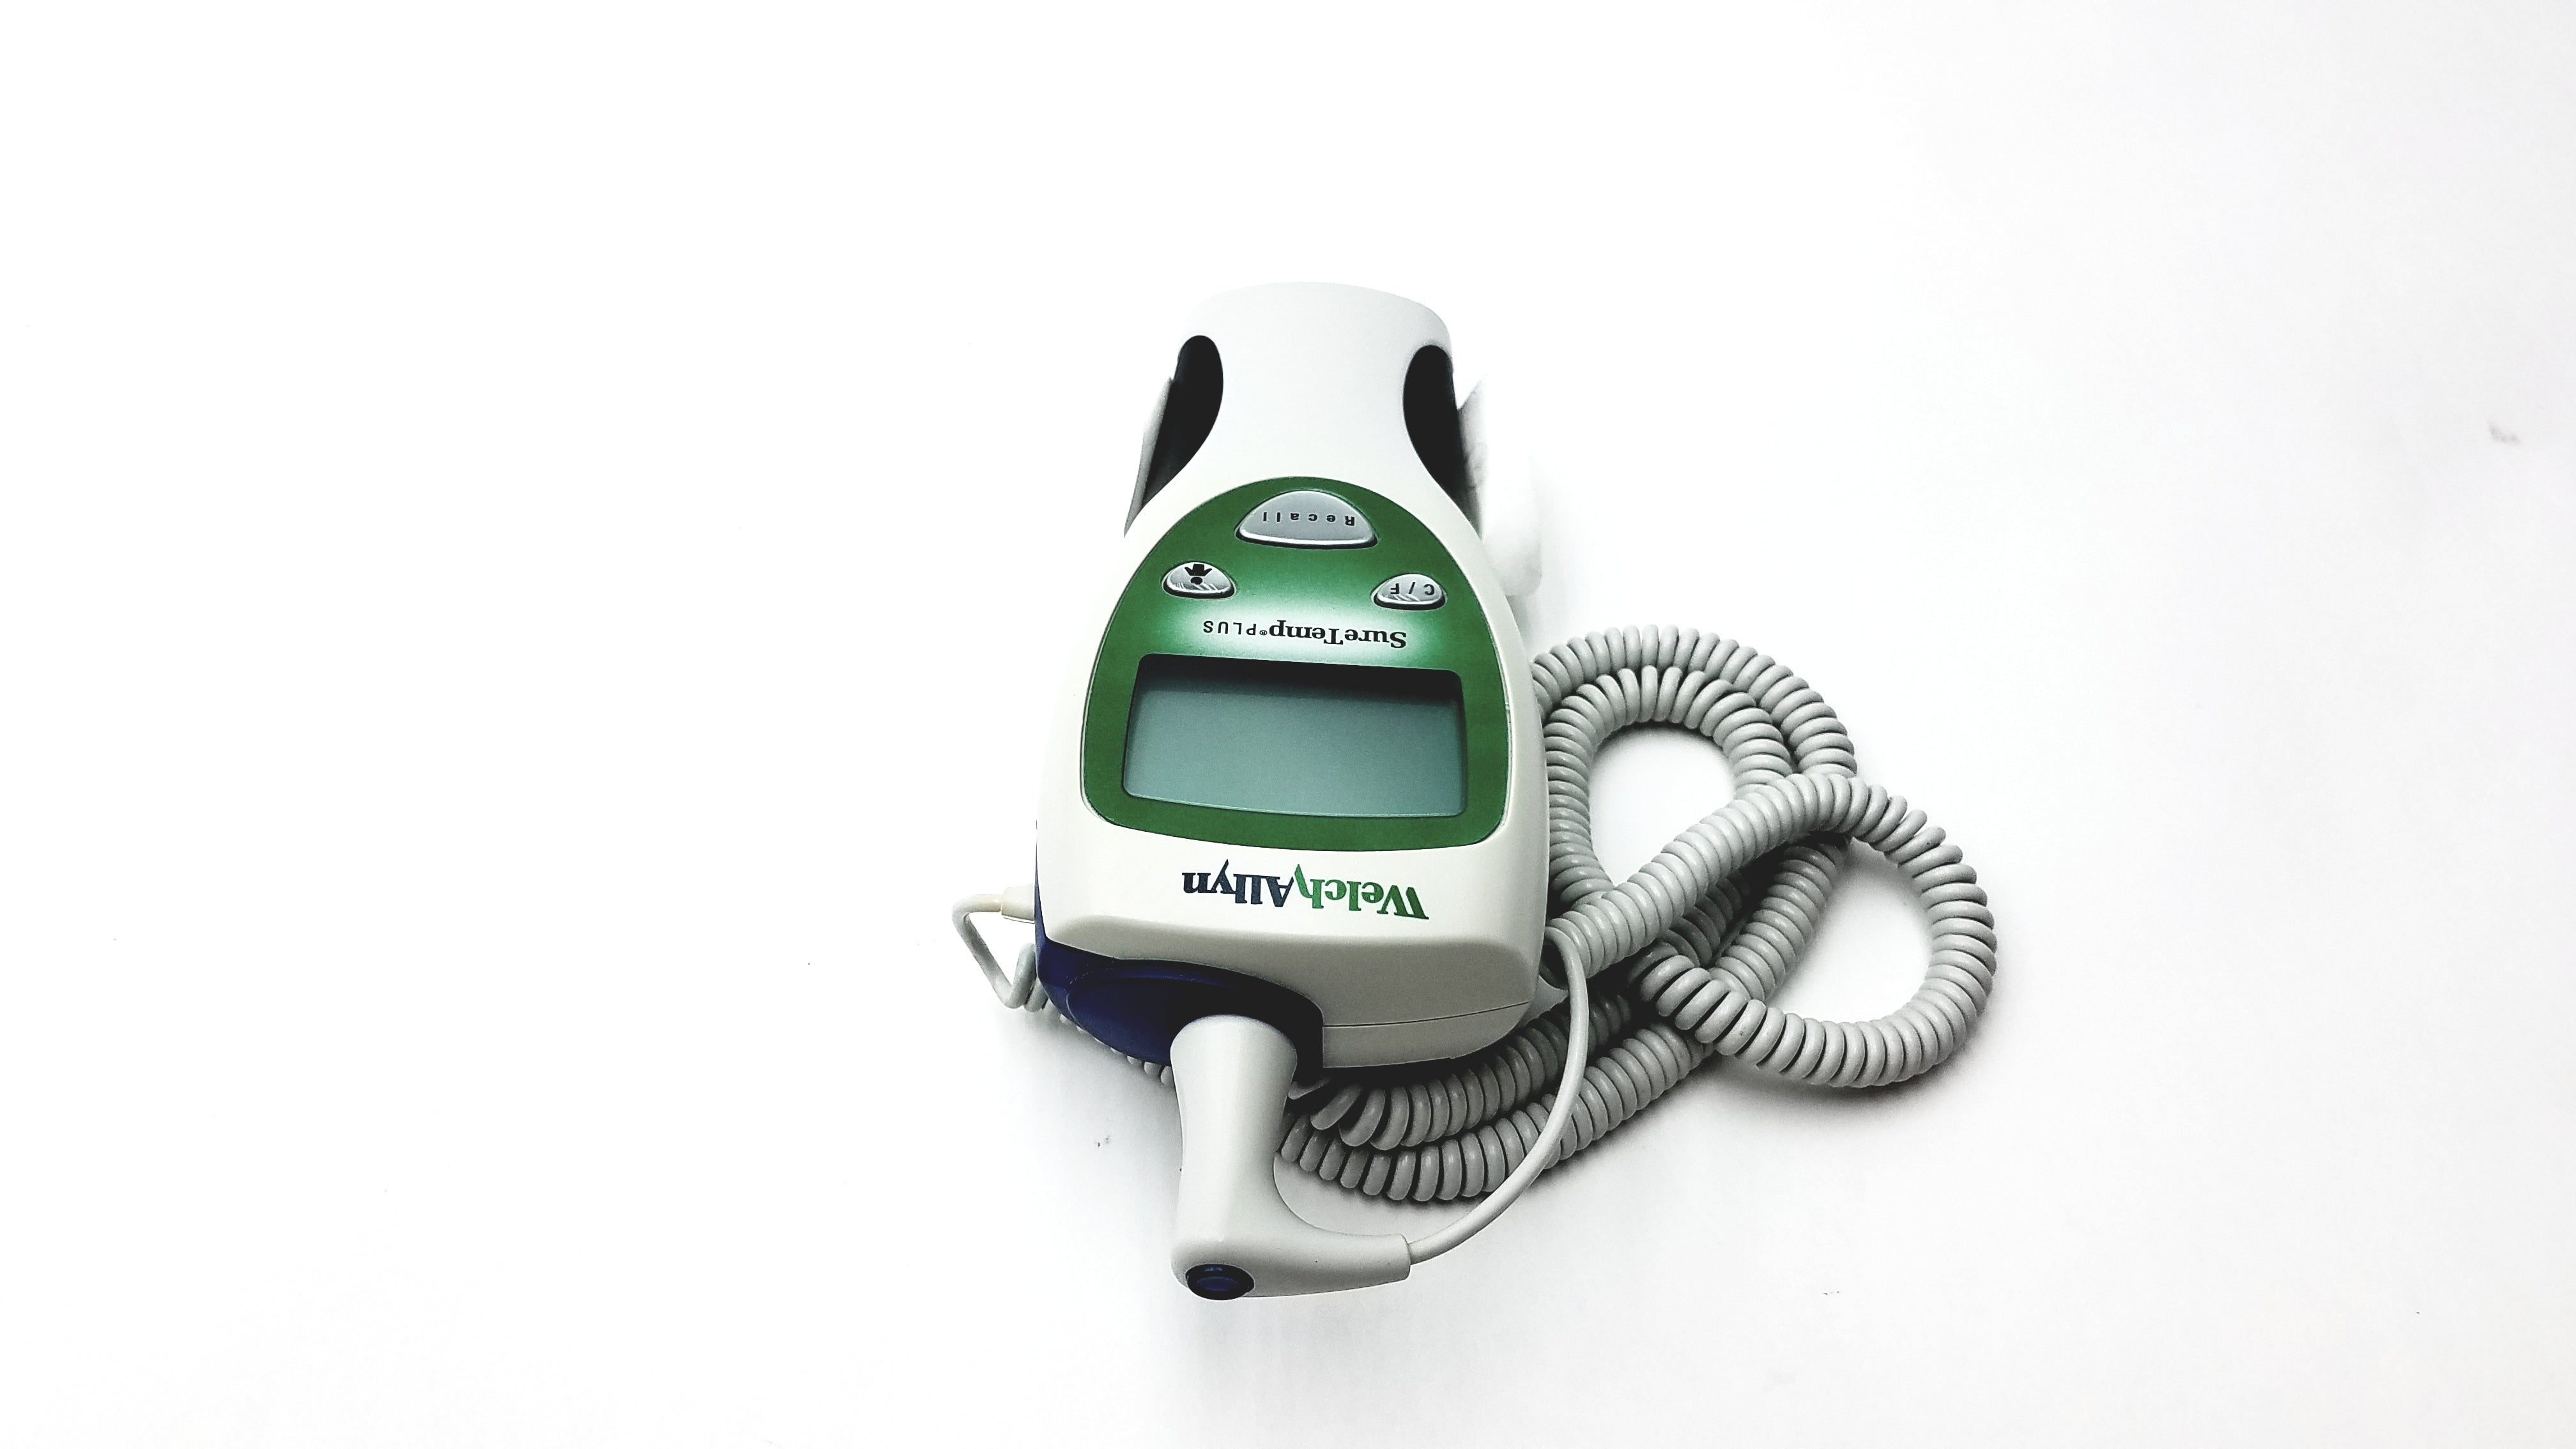 Load image into Gallery viewer, Welch Allyn #690 SureTemp Plus Thermometer